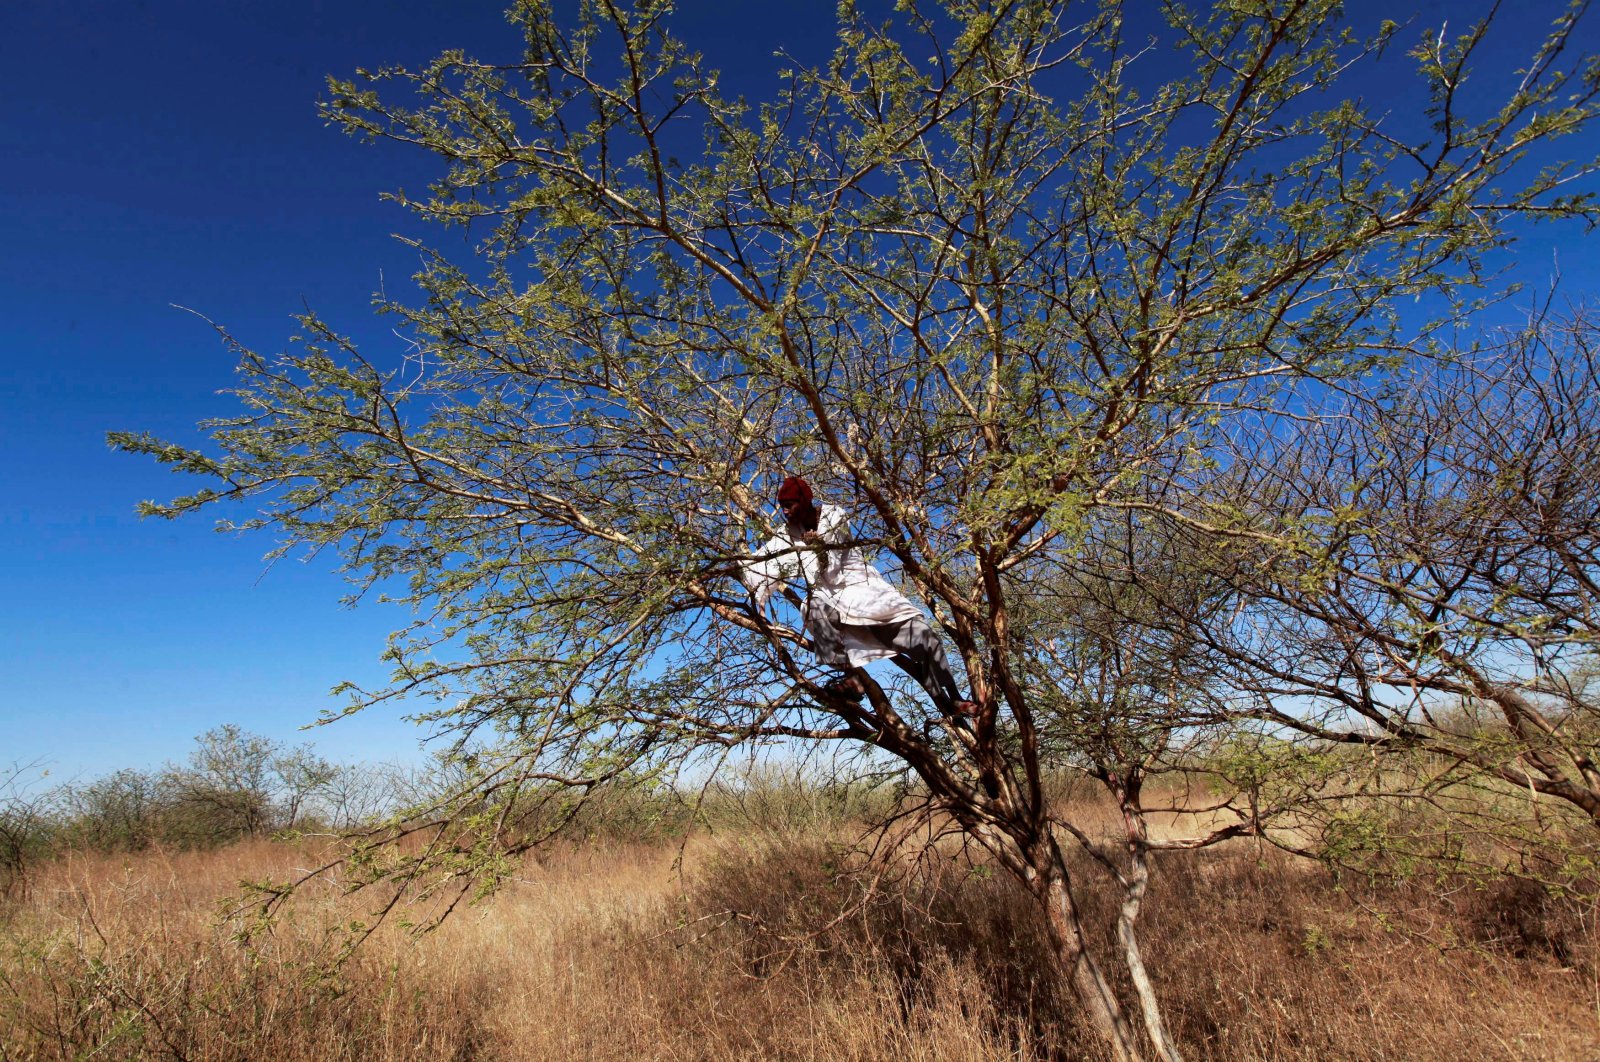 A farmer climbs on an Acacia tree to collect gum arabic in the western Sudanese town of El-Nahud that lies in the main farming state of North Kordofan, Sudan, Dec. 18, 2012. (Reuters Photo)